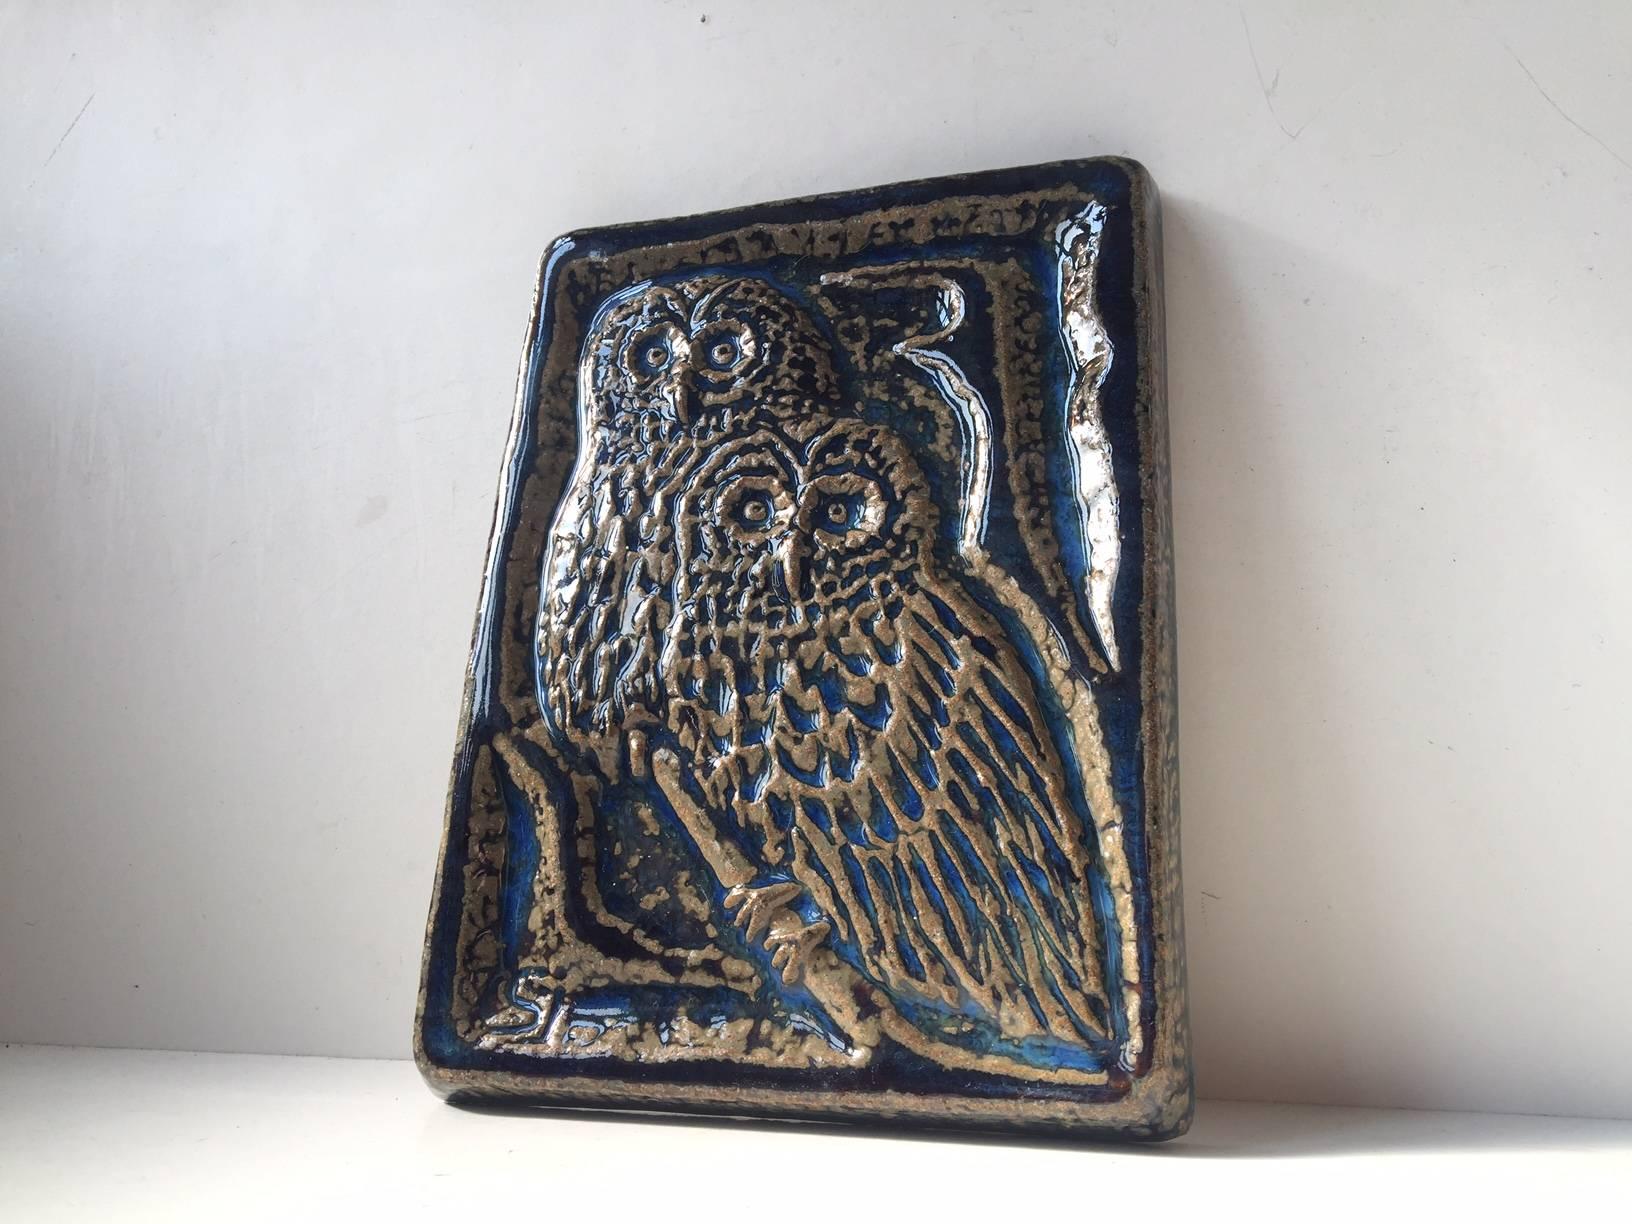 Danish Midcentury Stoneware Wall Plaque with Owls by Sven Aage Jensen, Soholm For Sale 1